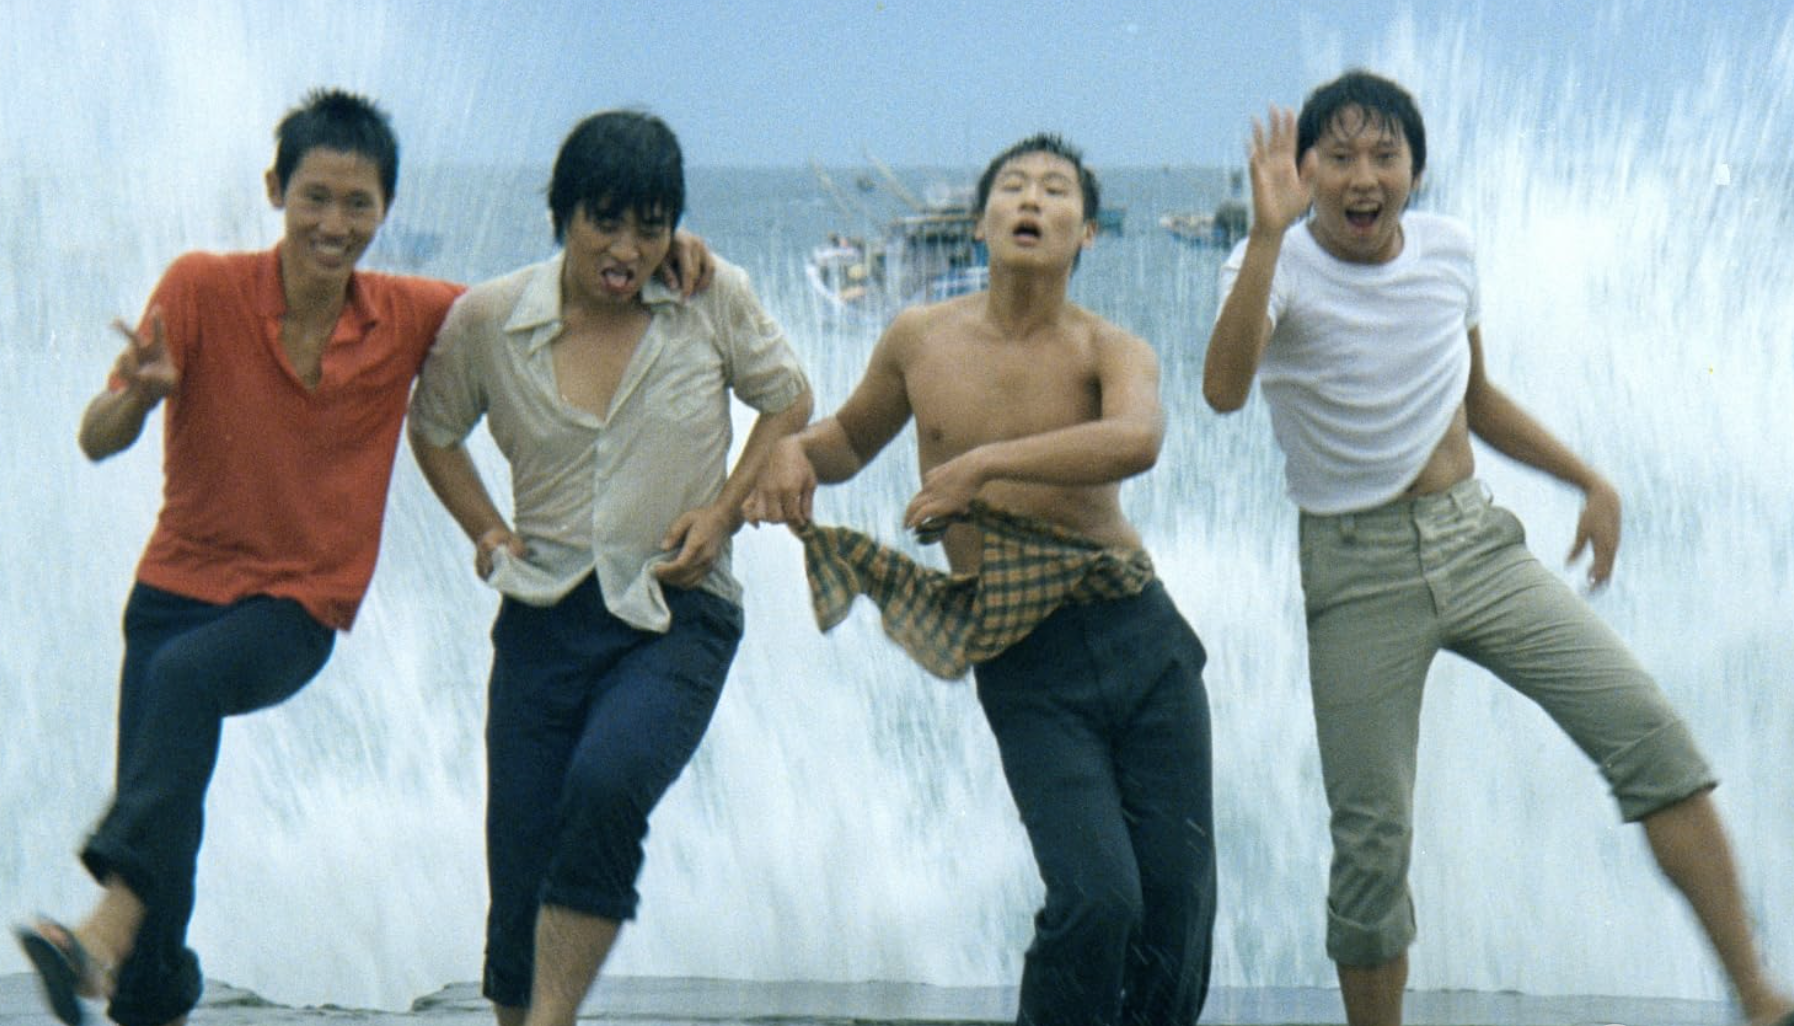 Four young men dancing with the ocean splashing behind them.